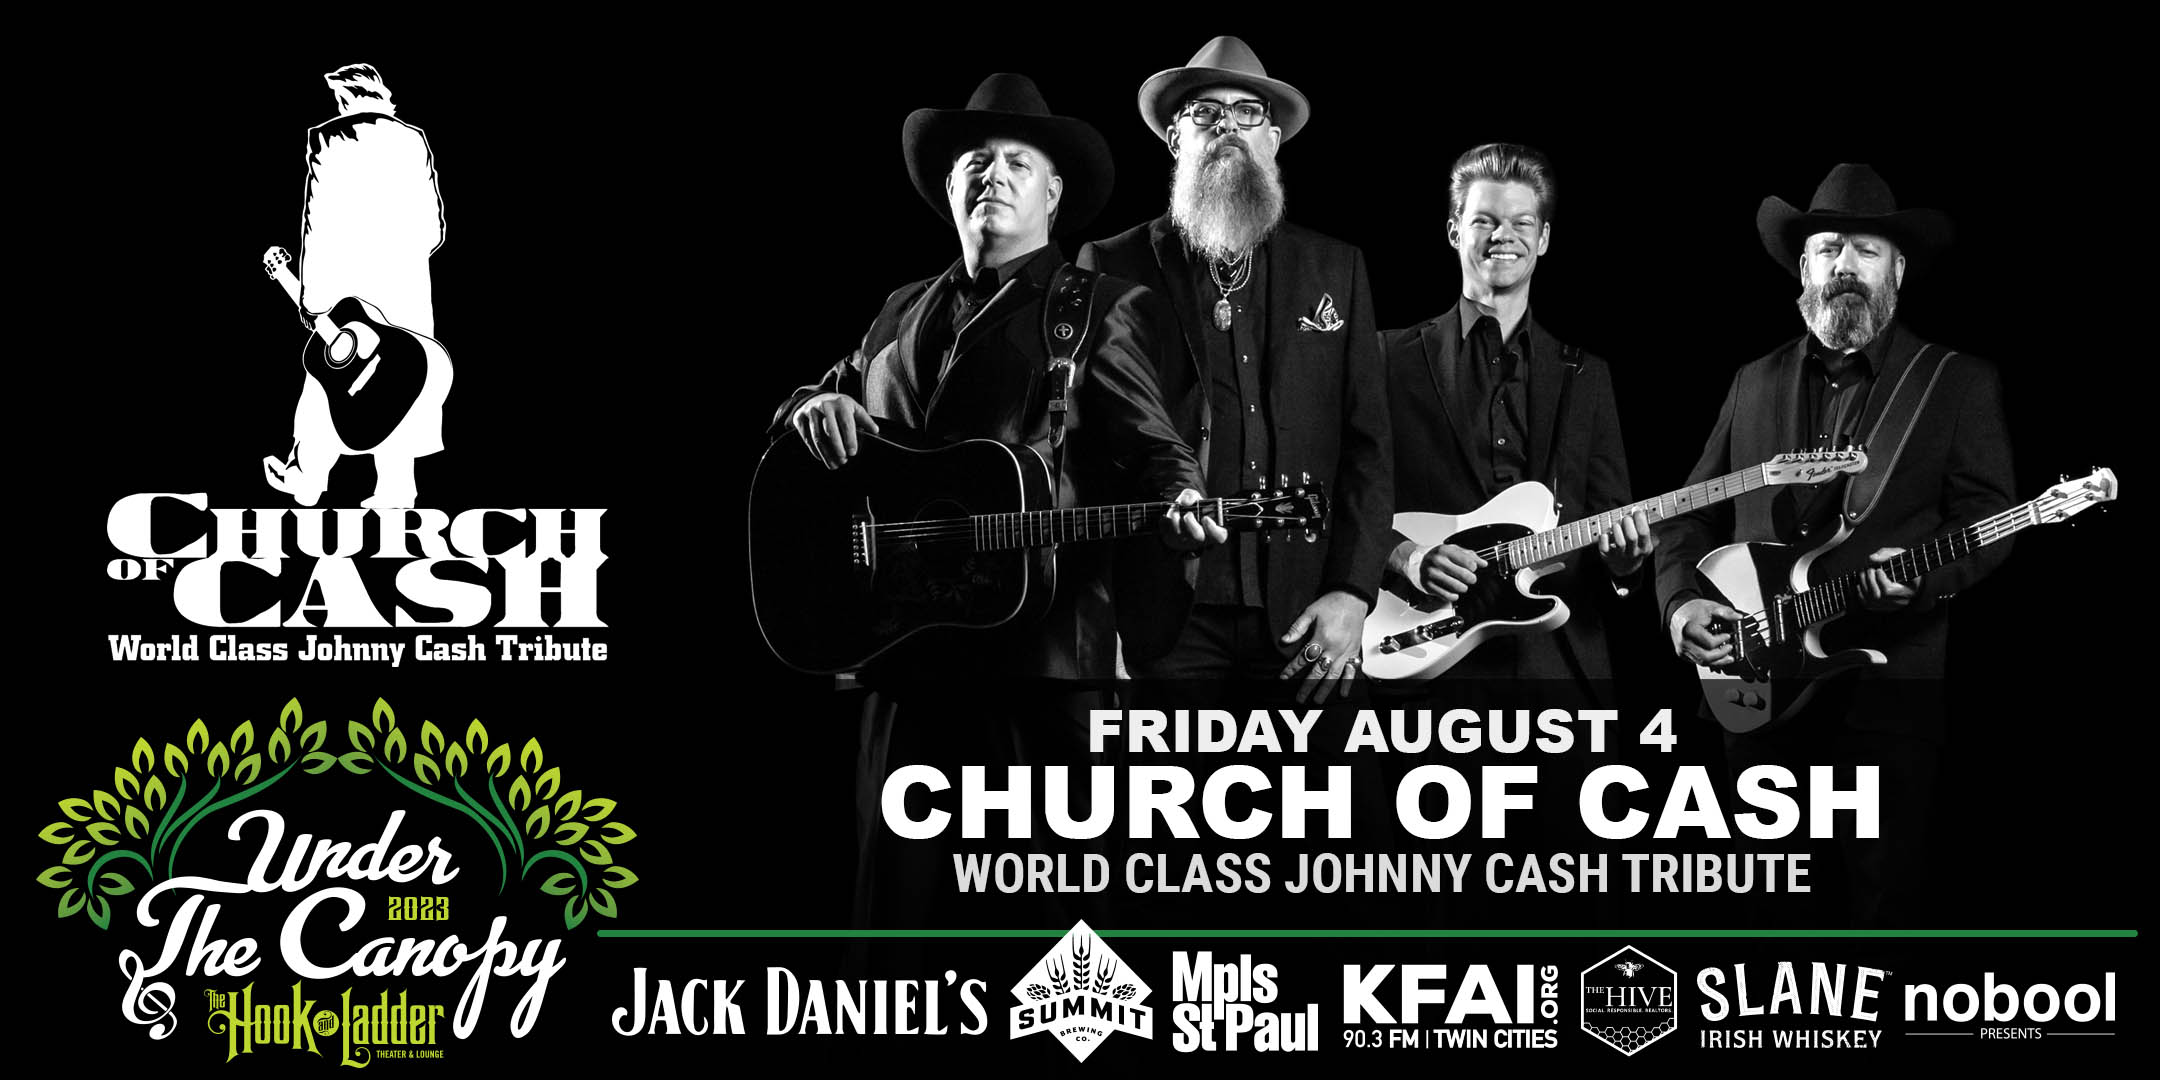 Church of Cash - Friday, August 4, 2023 - Under The Canopy at The Hook and Ladder Theater